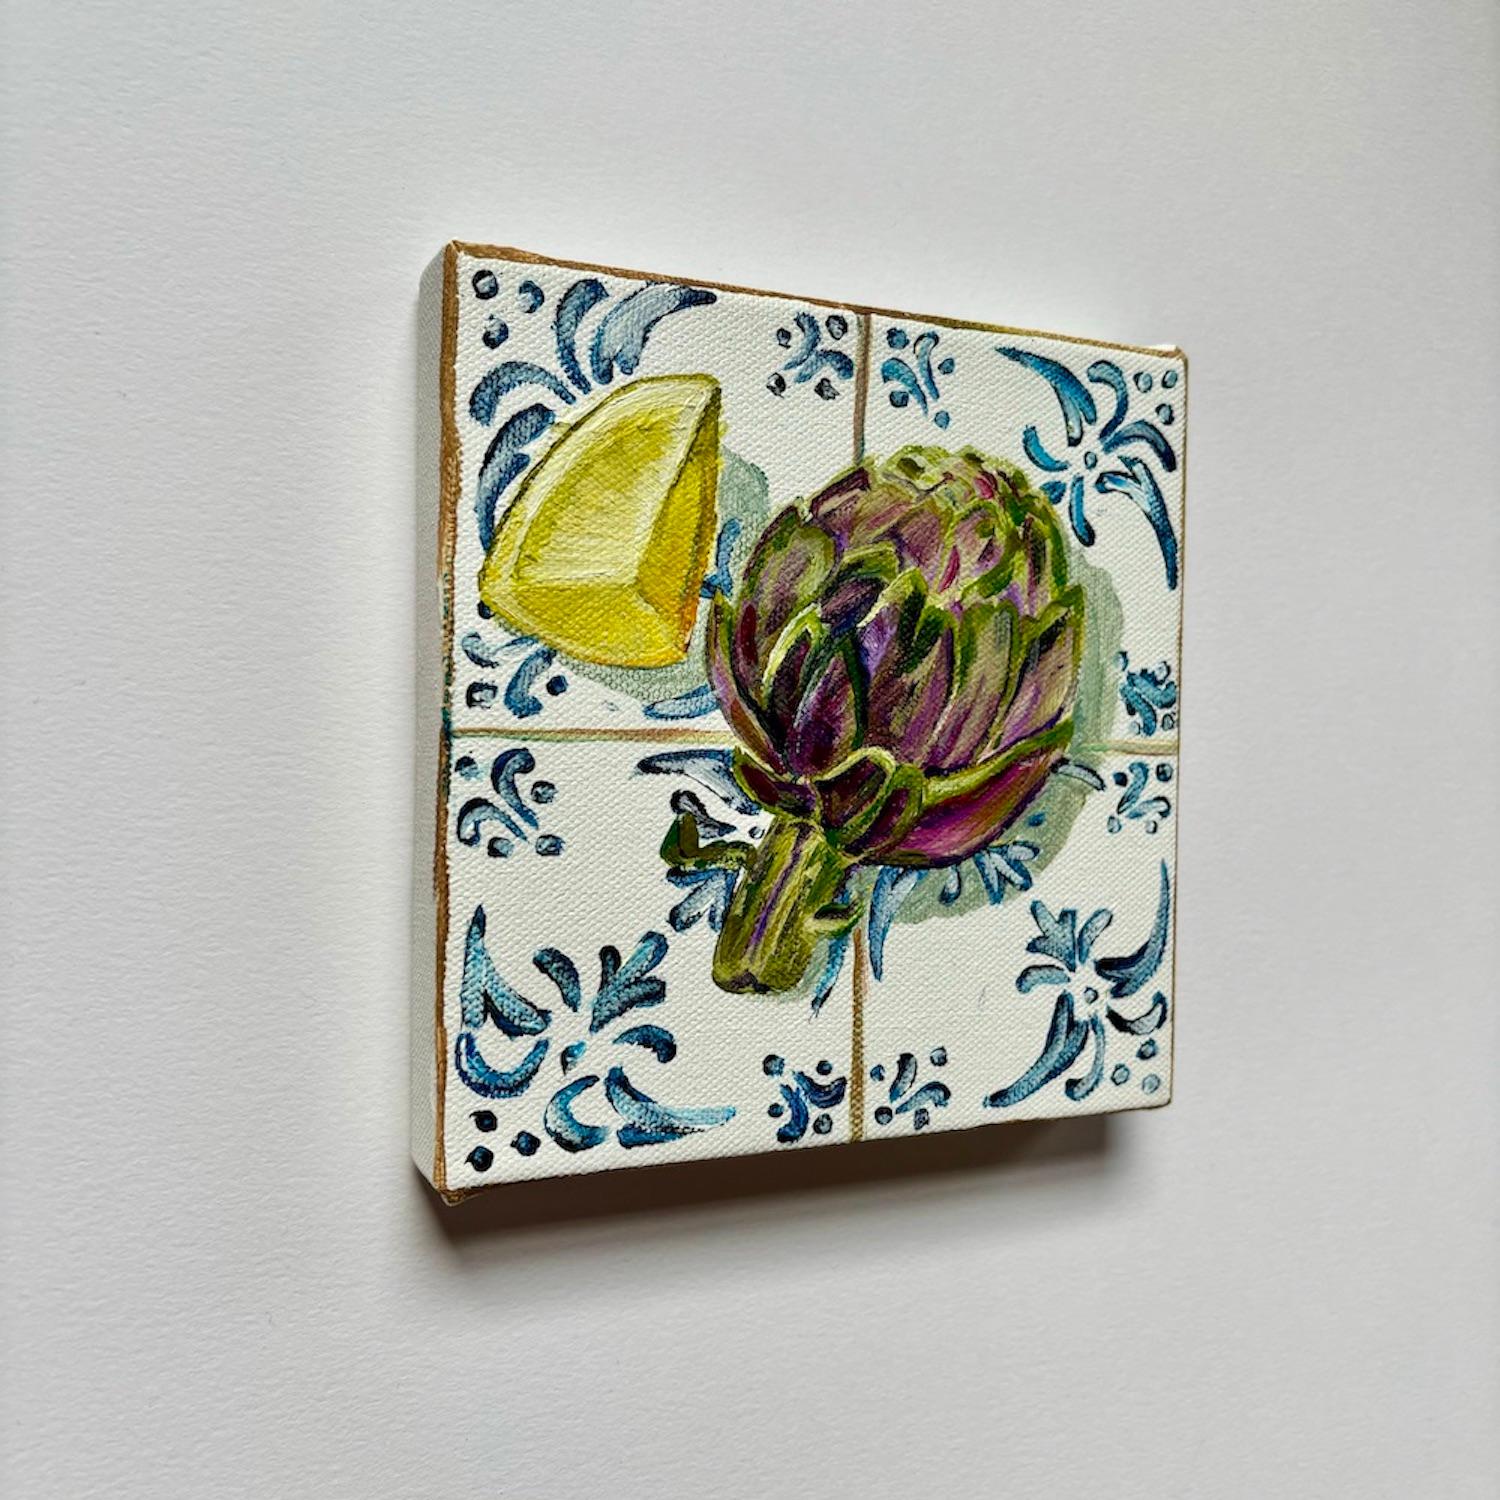 This contemporary still-life depicts a ripe artichoke and lemon wedge on blue and white Mediterranean tiles. This box canvas is part of my MINI Tiles series, and is ready to be hung unframed. Inspired by my Abuela's home kitchen. (Grandmother's home